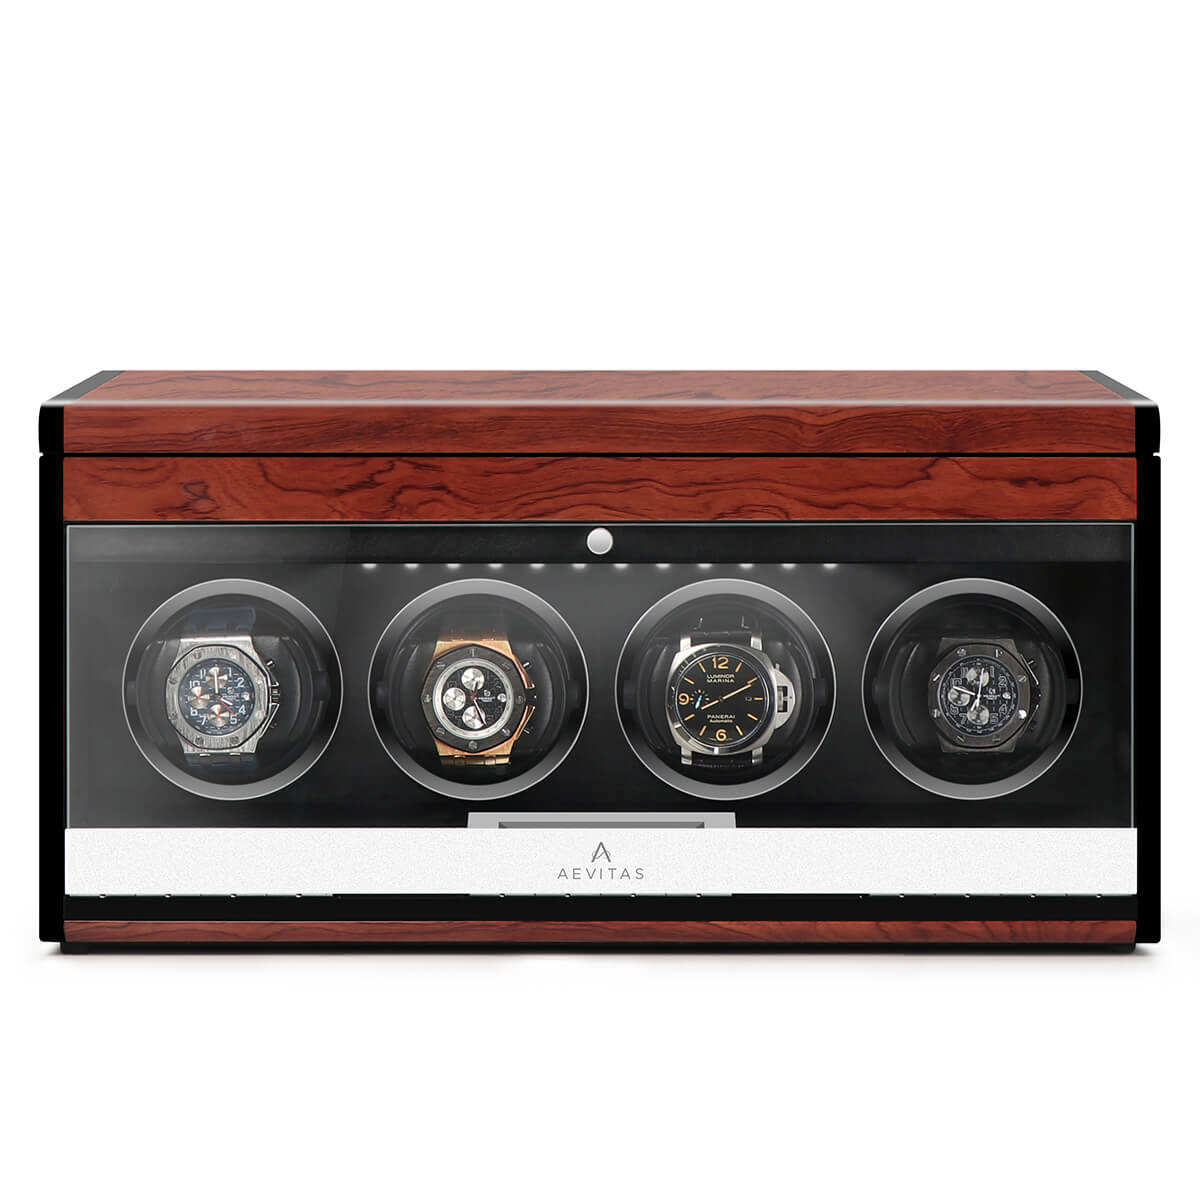 4 Watch Winder with Extra Storage Wood Veneer Finish by Aevitas - Special Offer